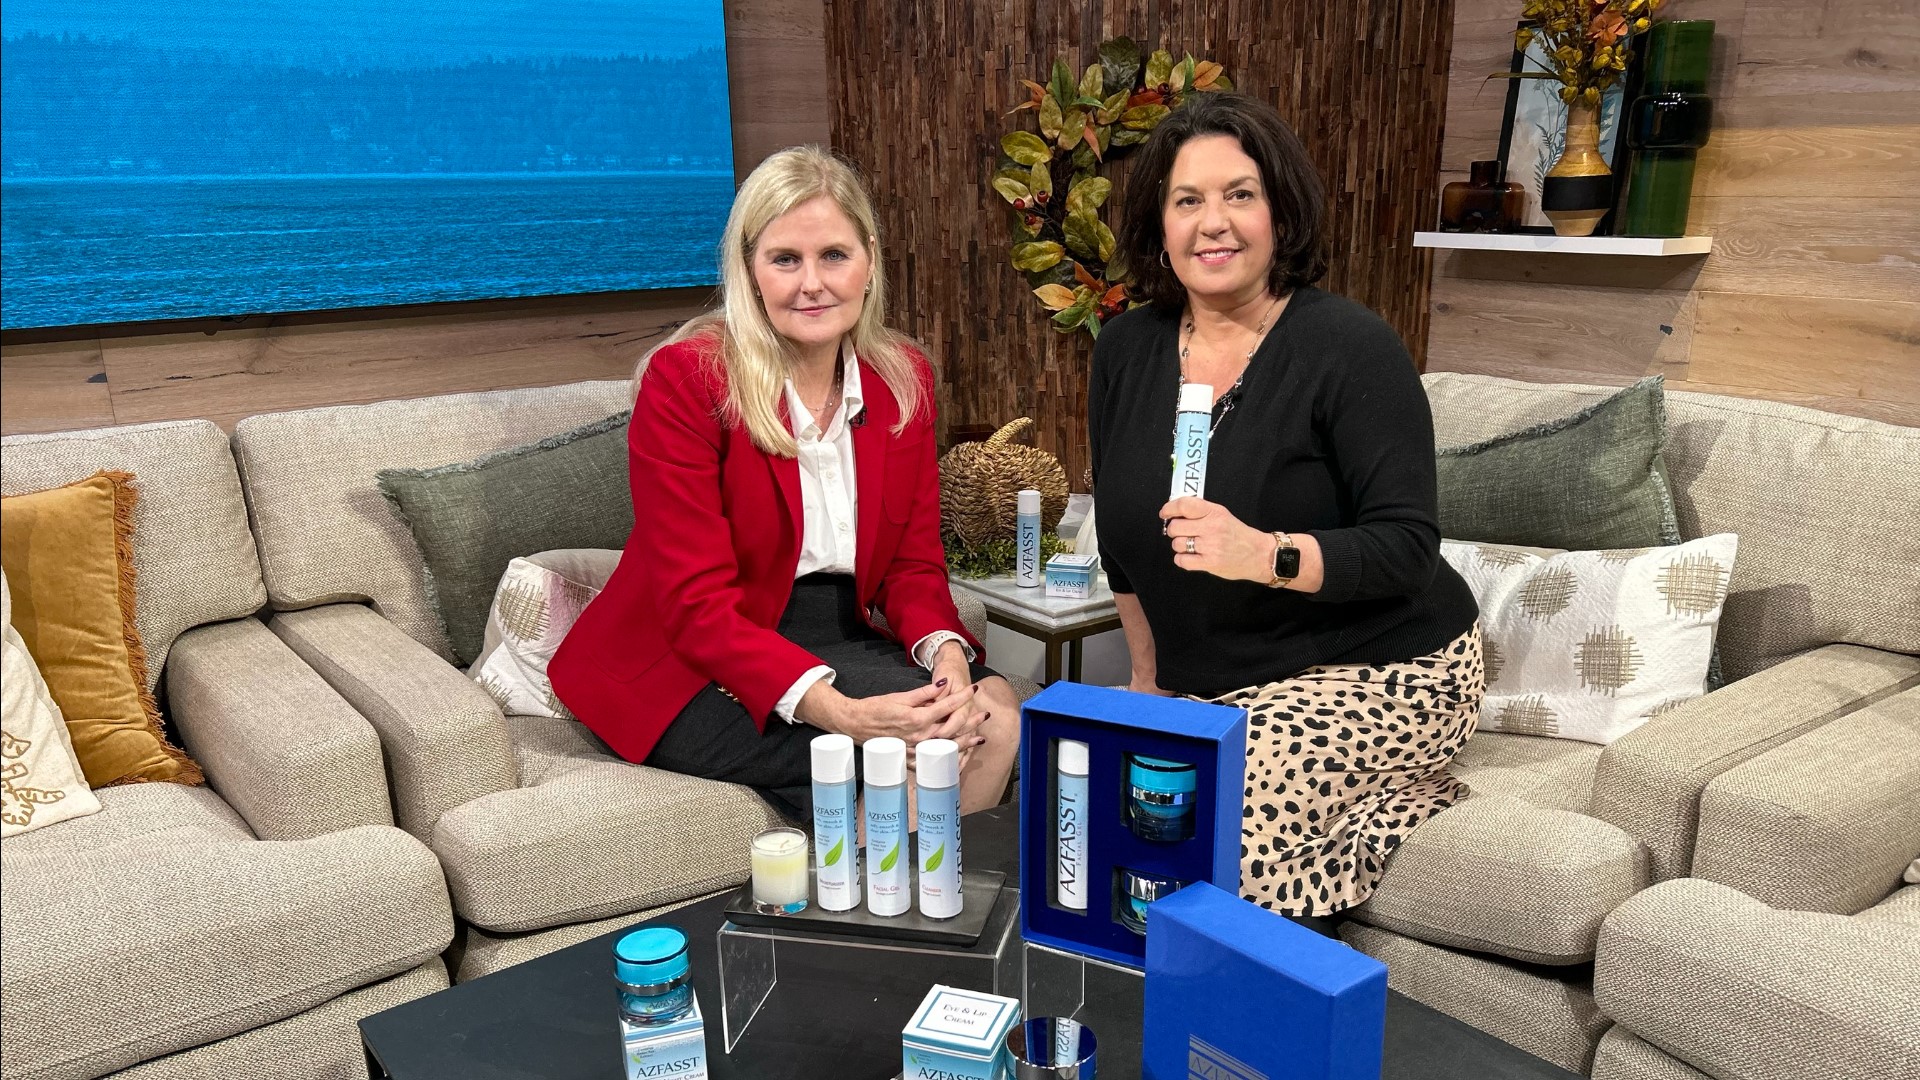 Dr. Anne Riordan is a board-certified dermatologist who created her own line of skincare products using green tea botanicals to target aging. Sponsored by Azfasst.